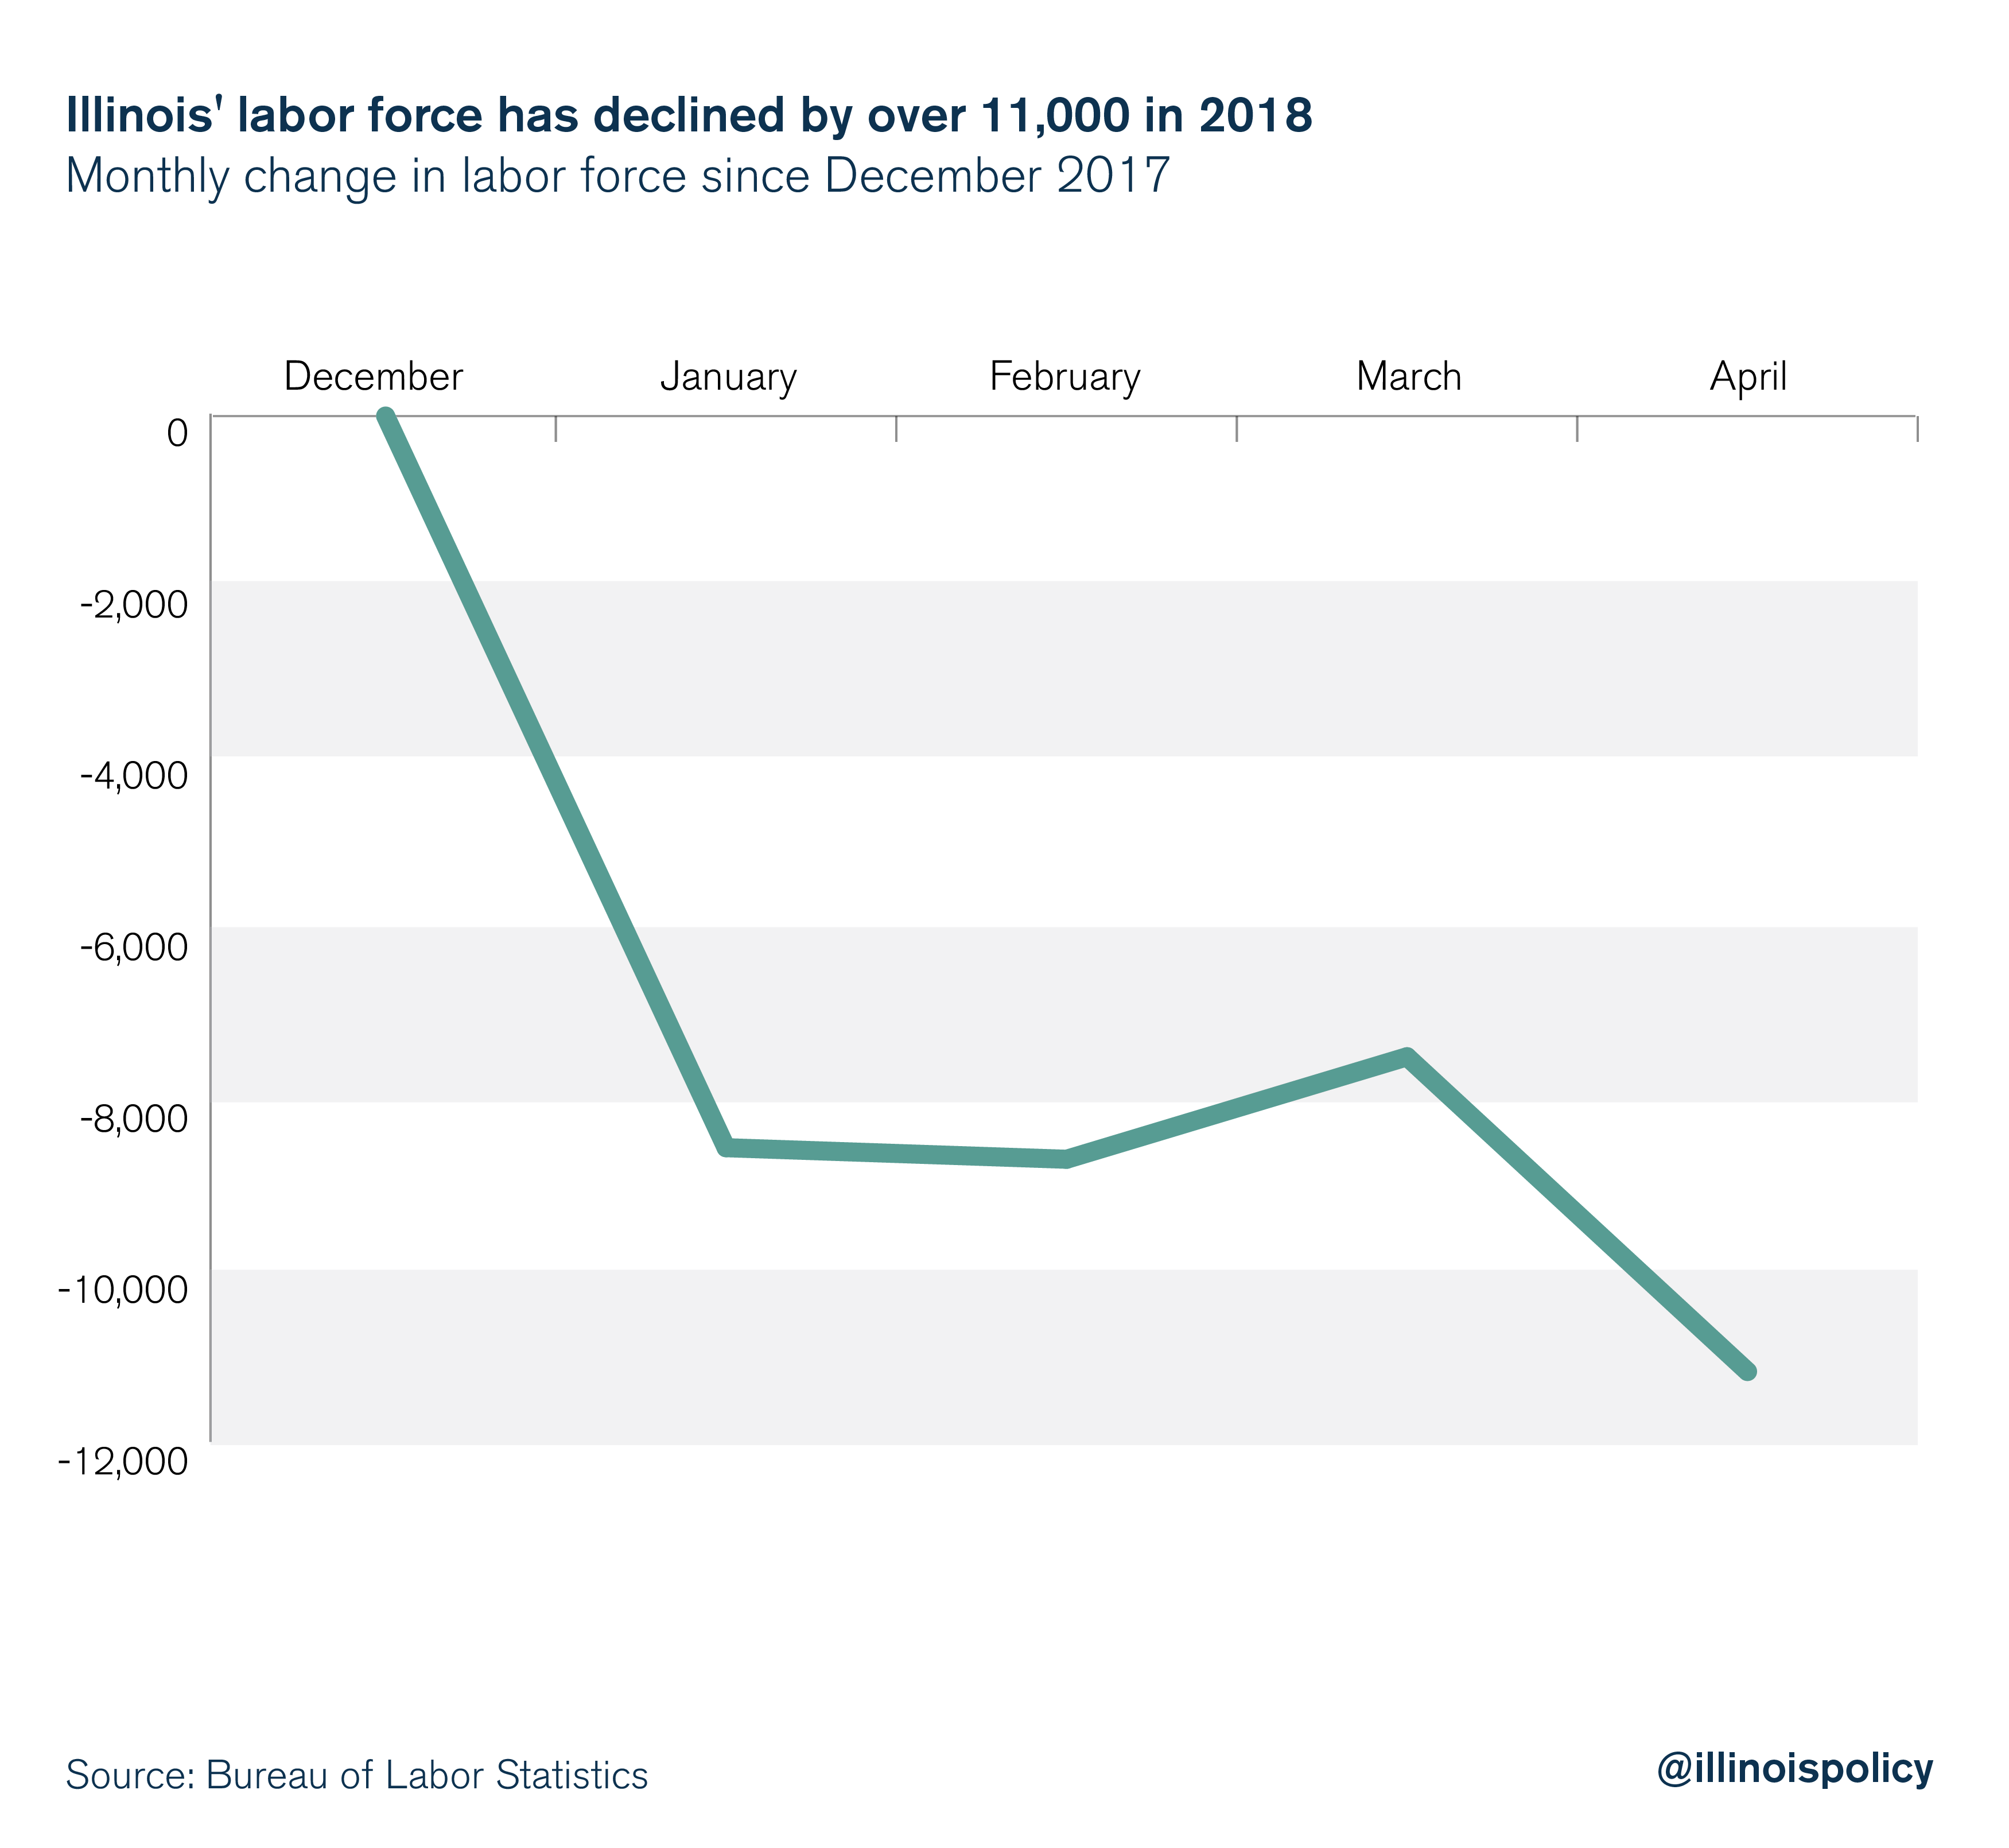 Illinois' labor force has declined by over 11,000 in 2018